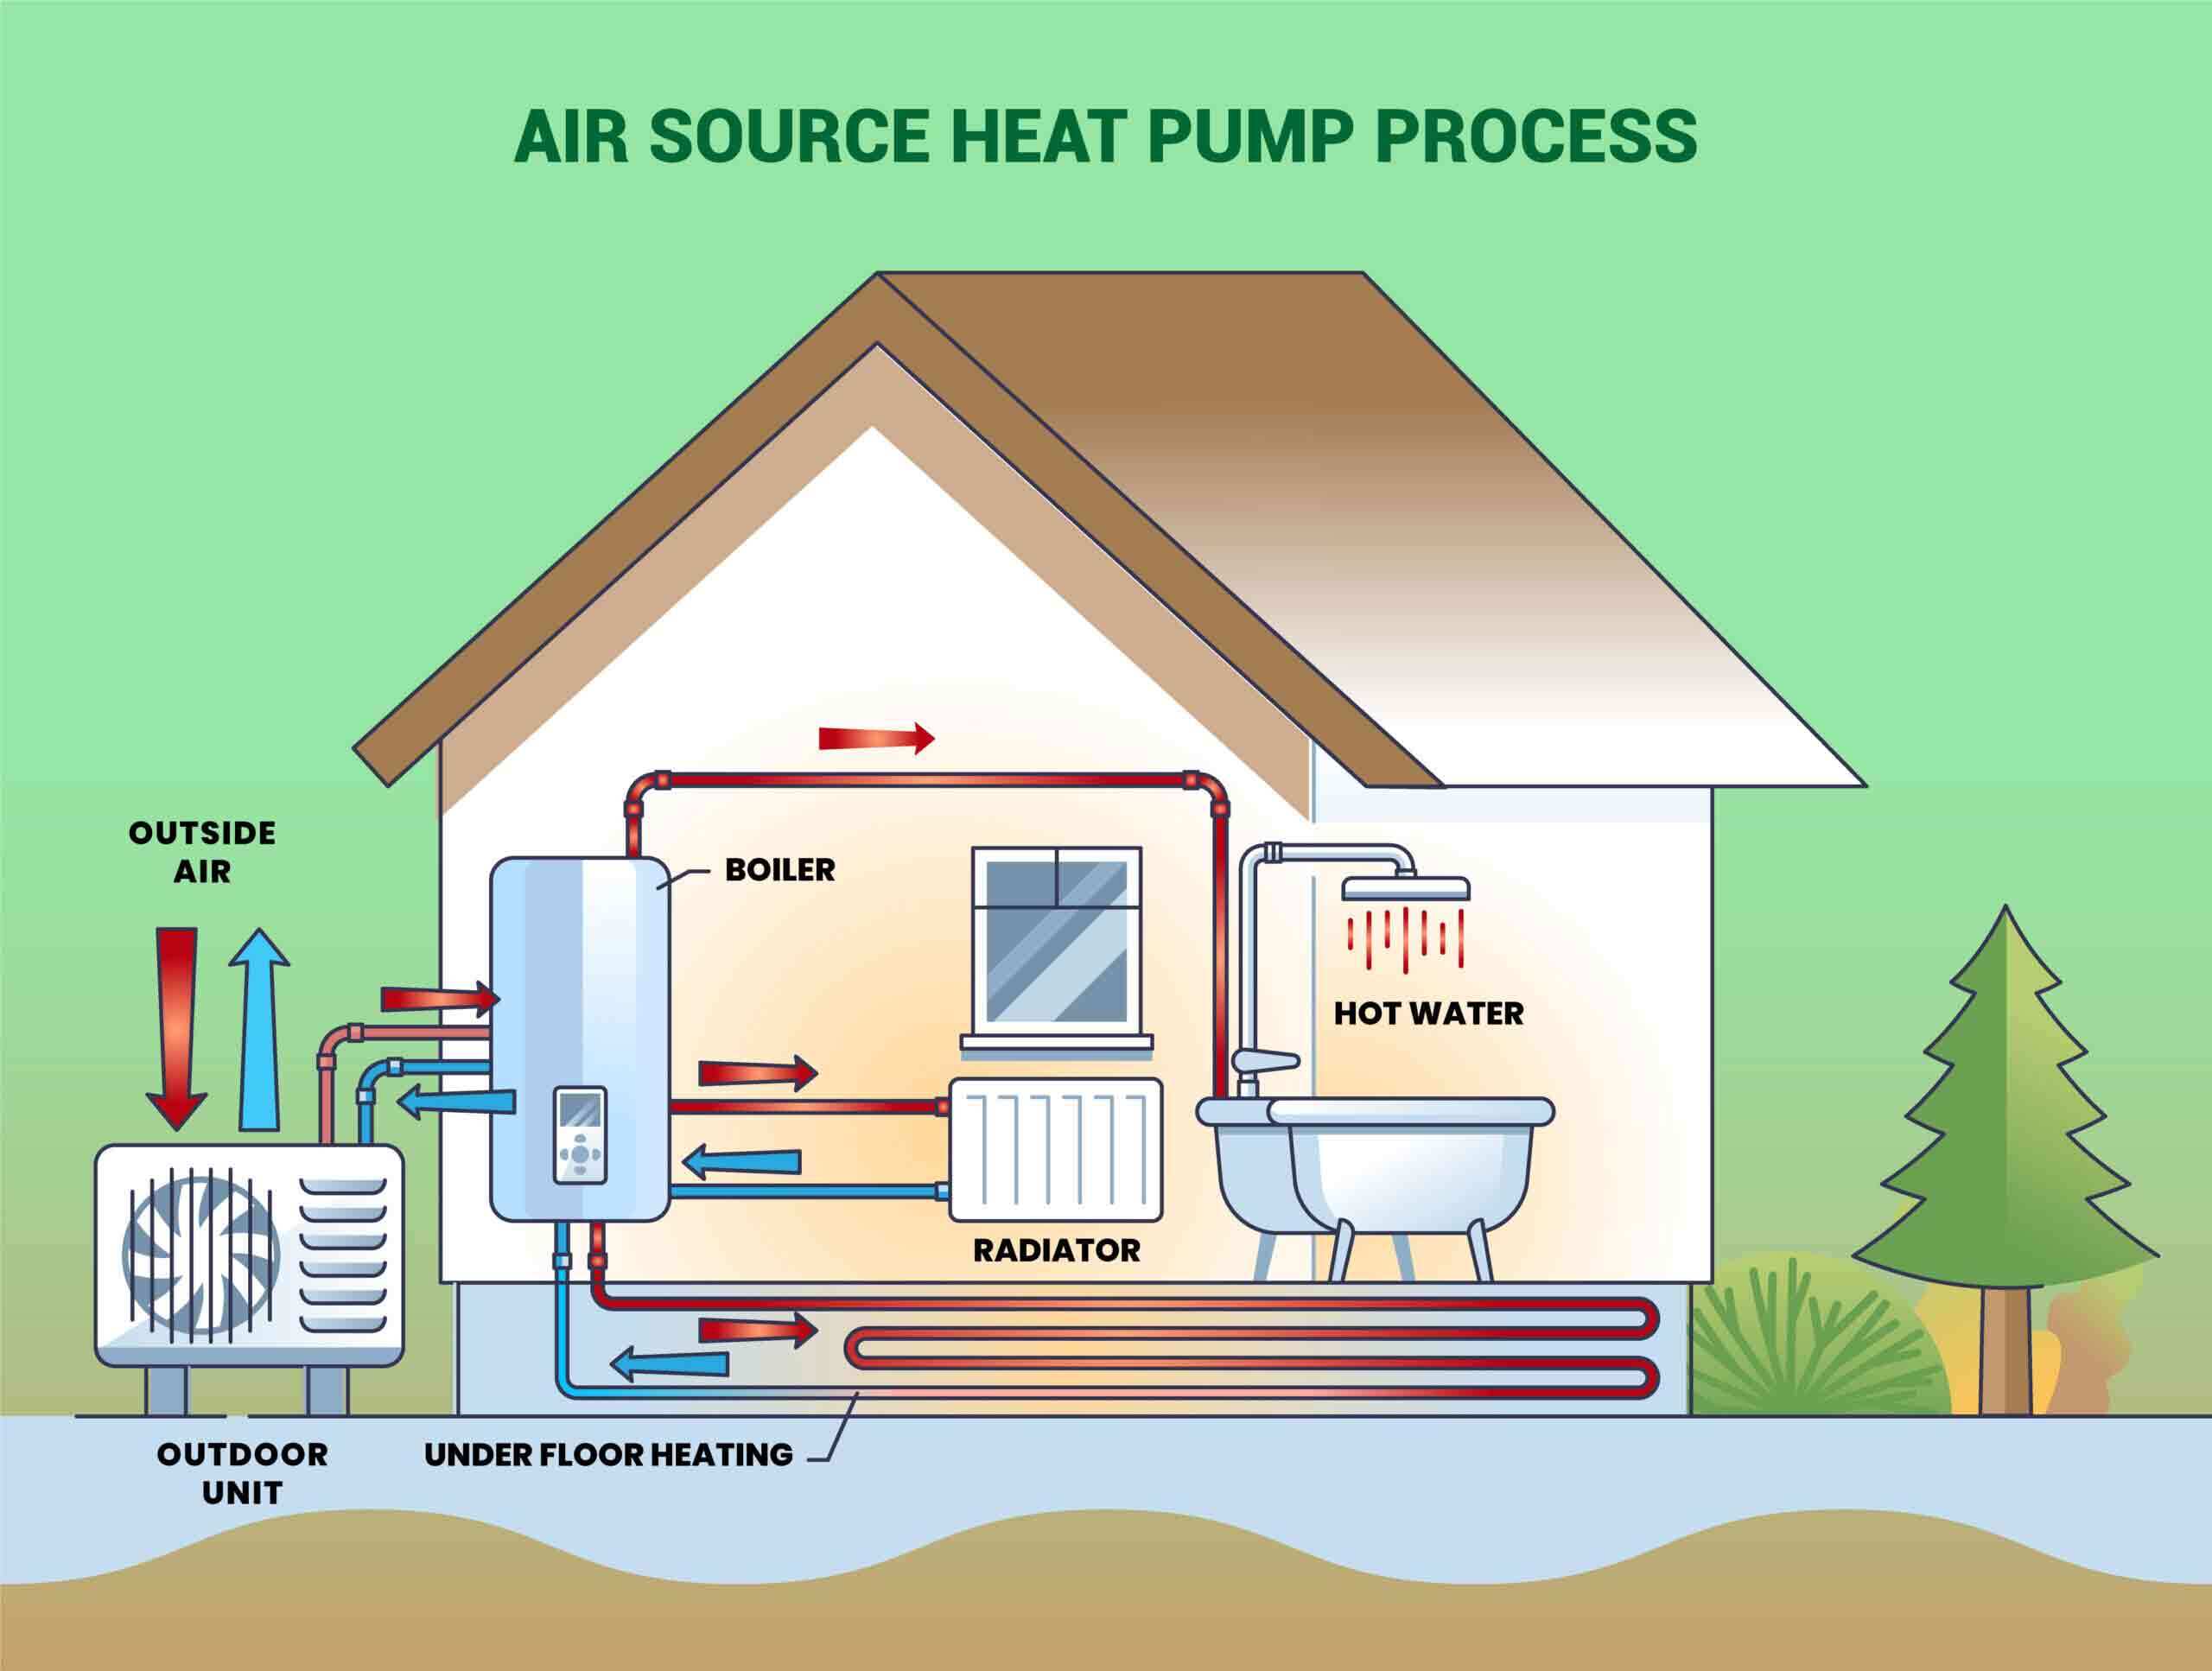 process of air source heat pump explained